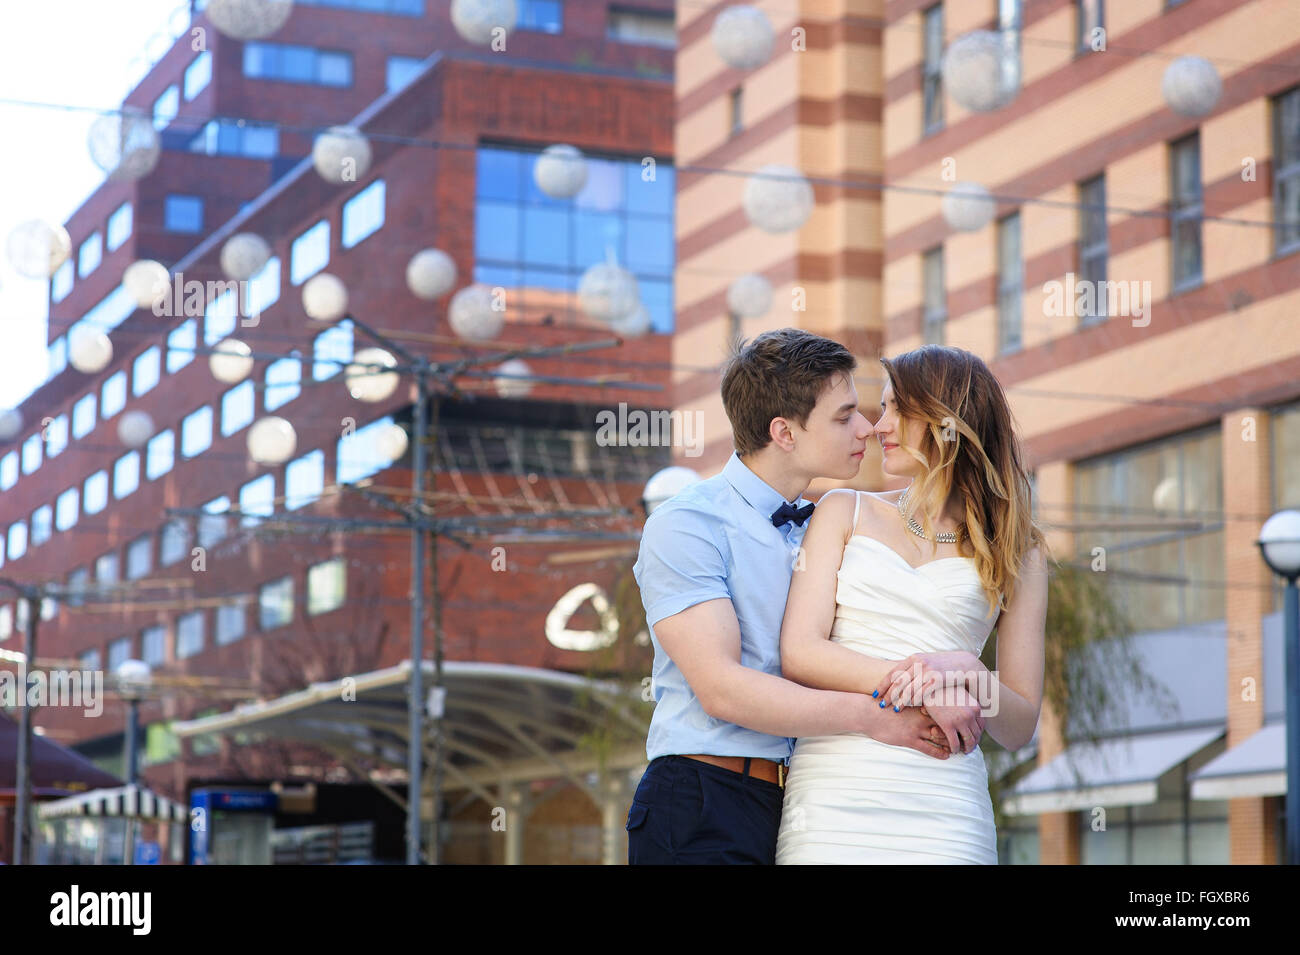 Bride and groom walking around among the houses buildings Stock Photo